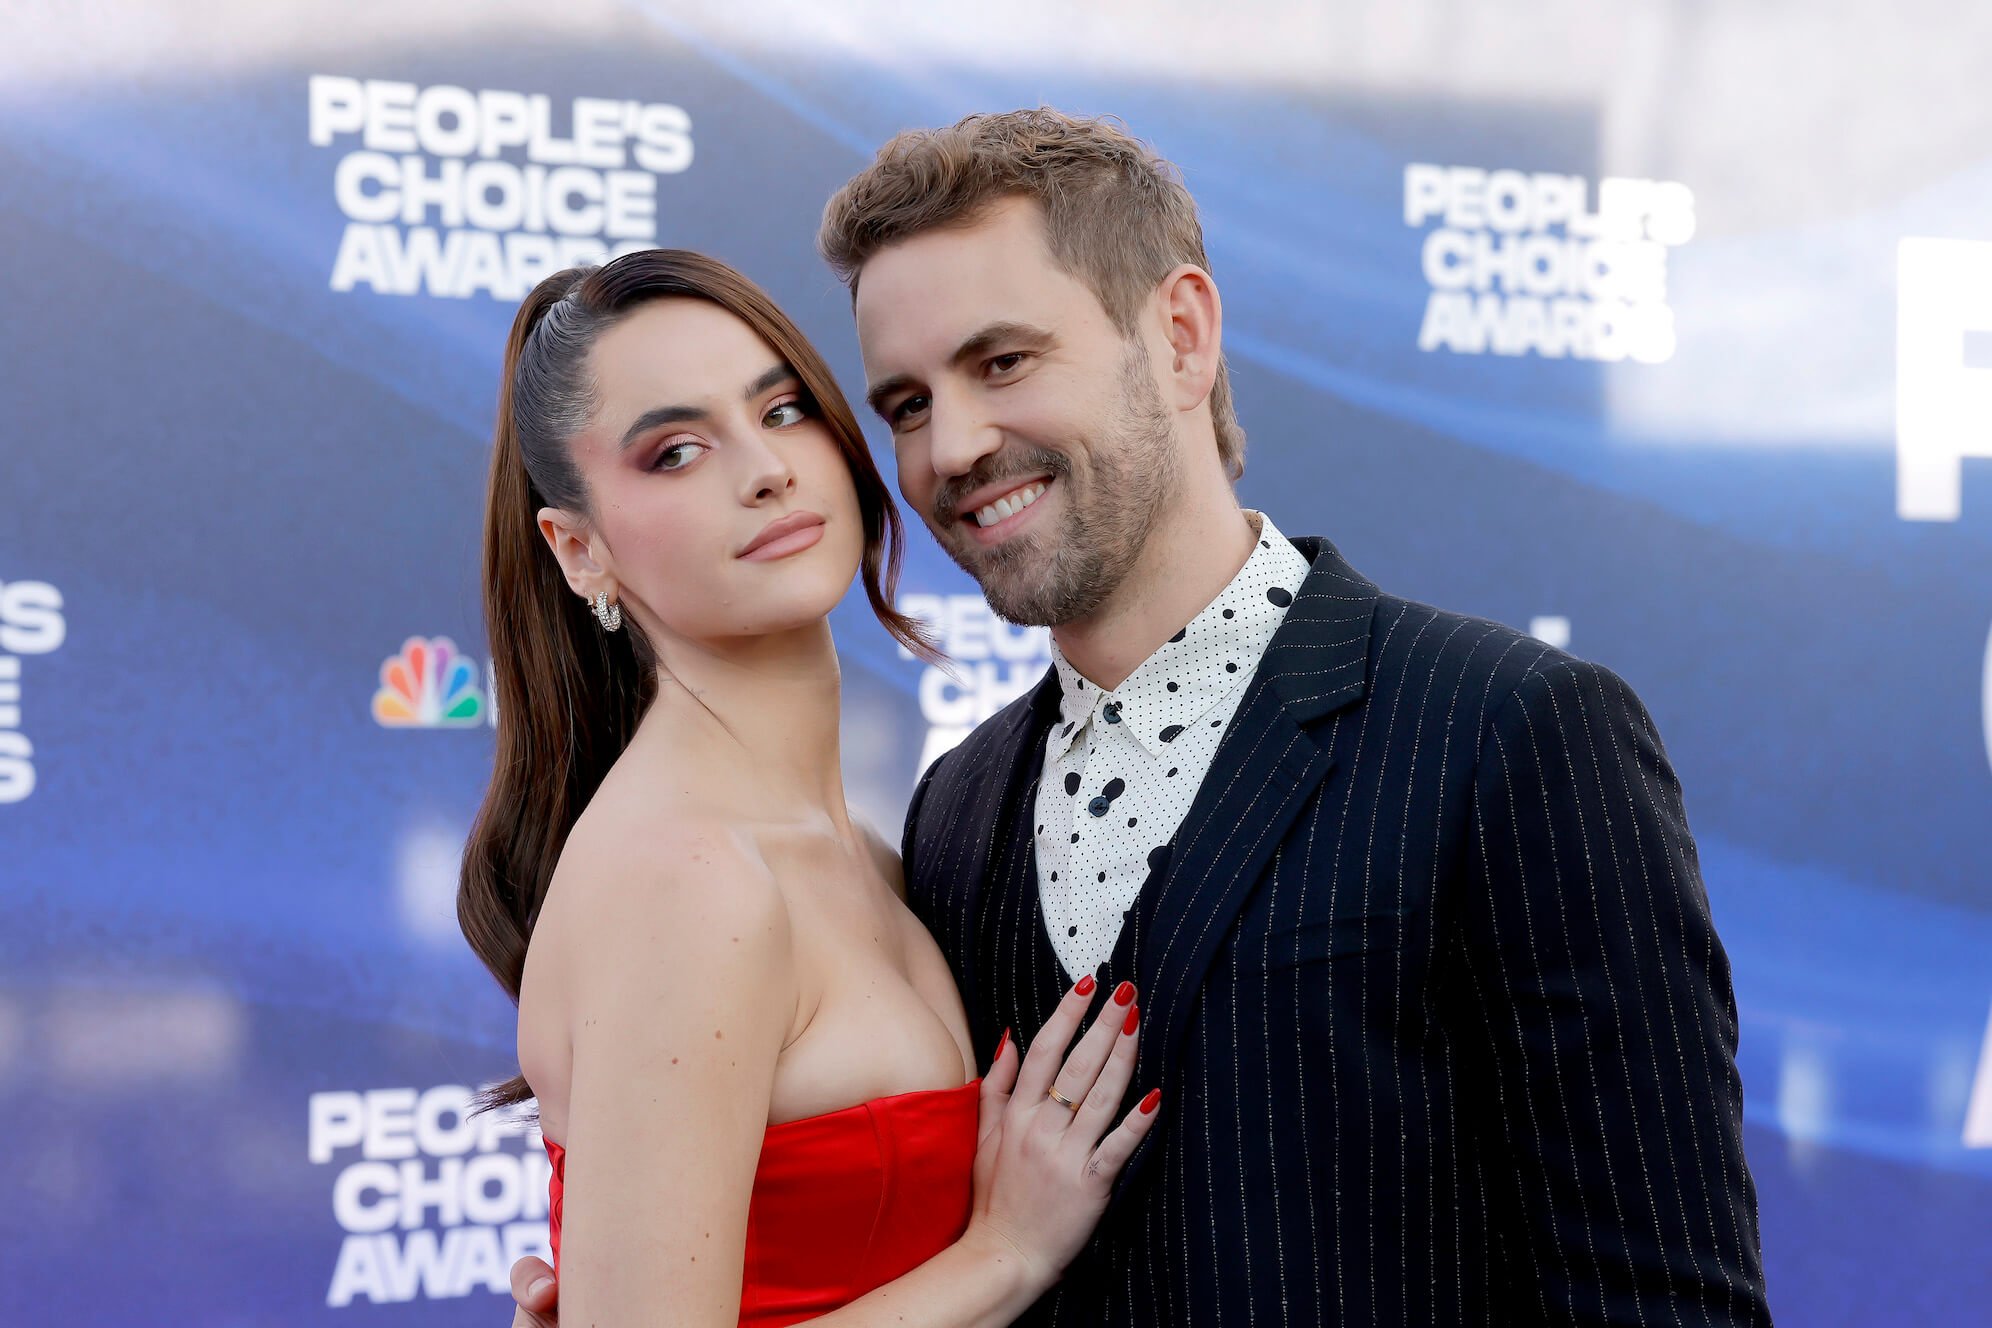 Natalie Joy and Nick Viall hugging and posing at an event